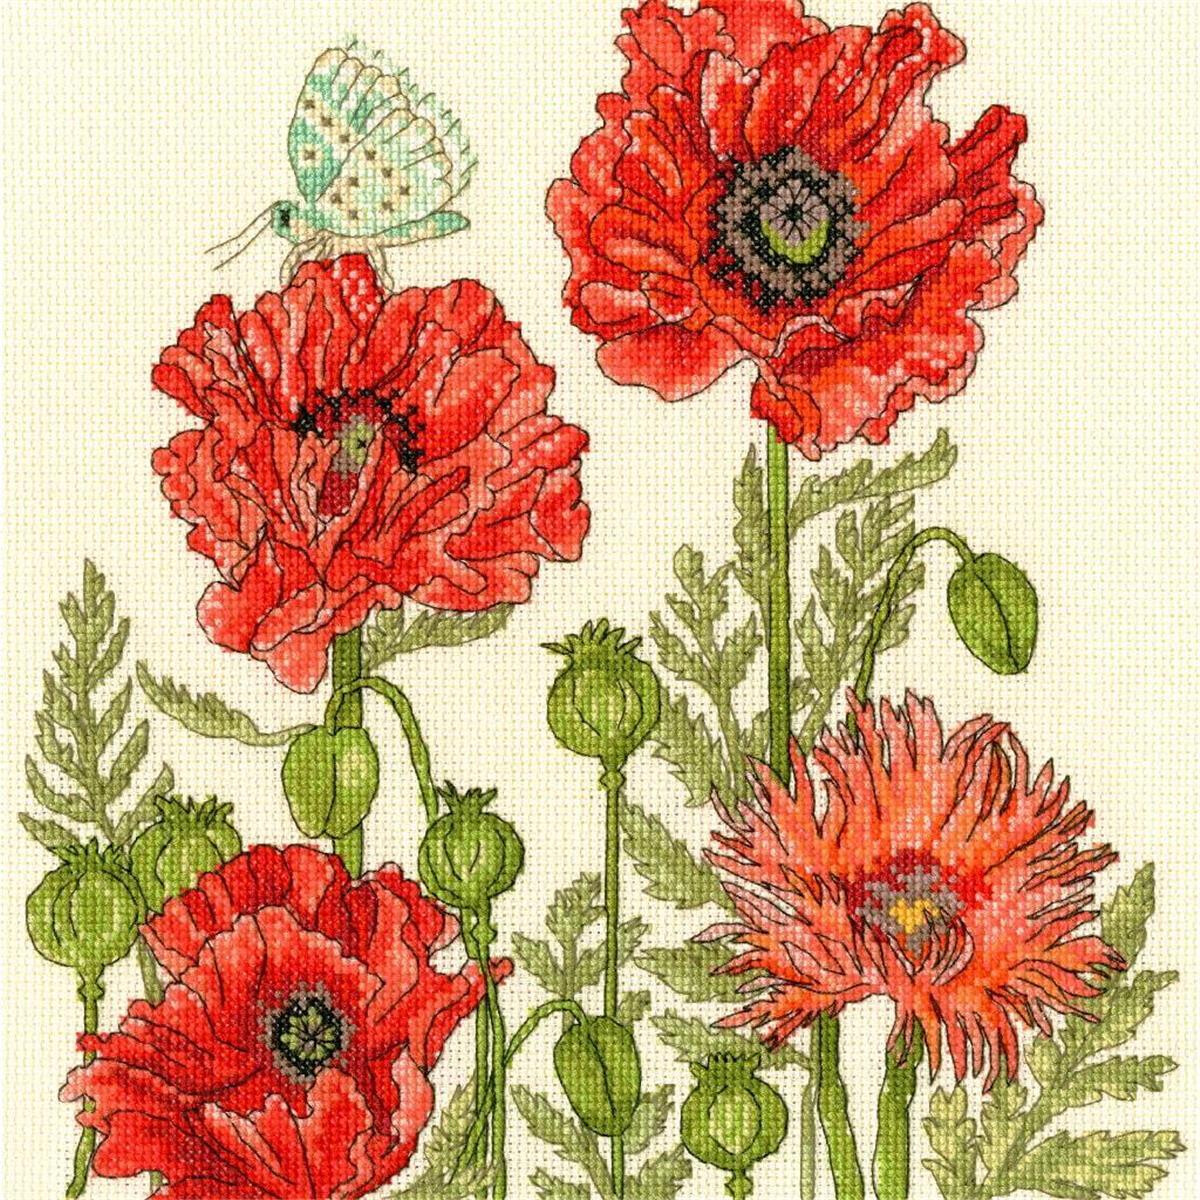 A colorful embroidery piece created with an embroidery...